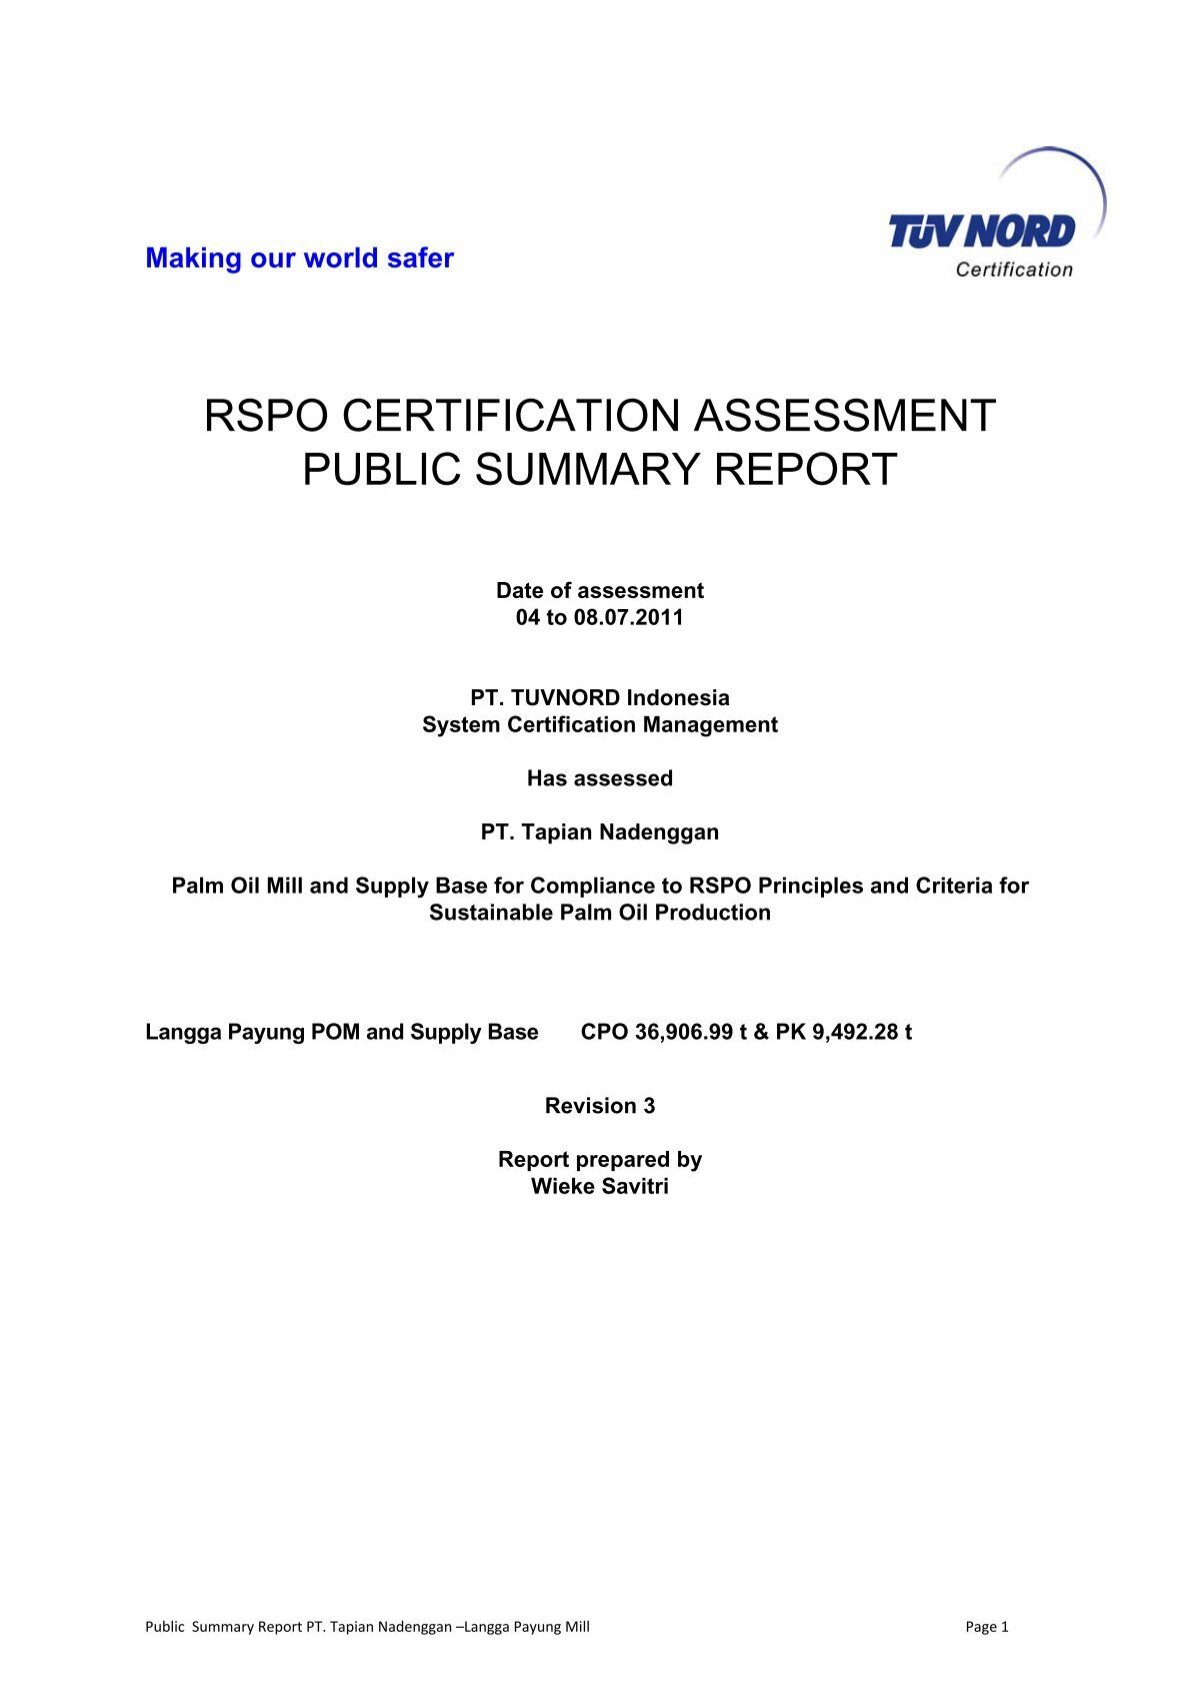 RSPO CERTIFICATION ASSESSMENT PUBLIC SUMMARY REPORT